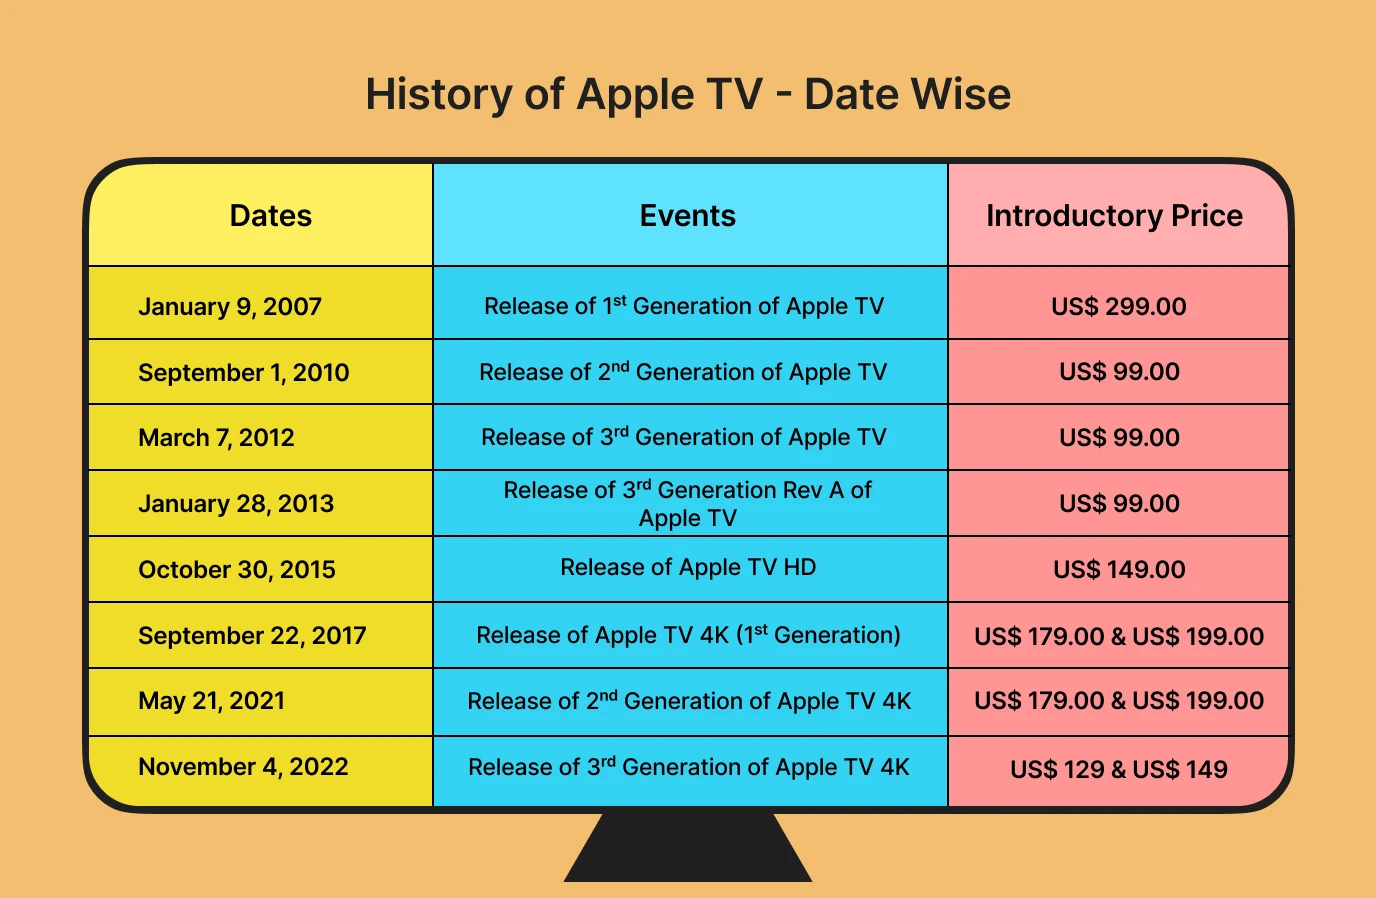 The History of Apple TV